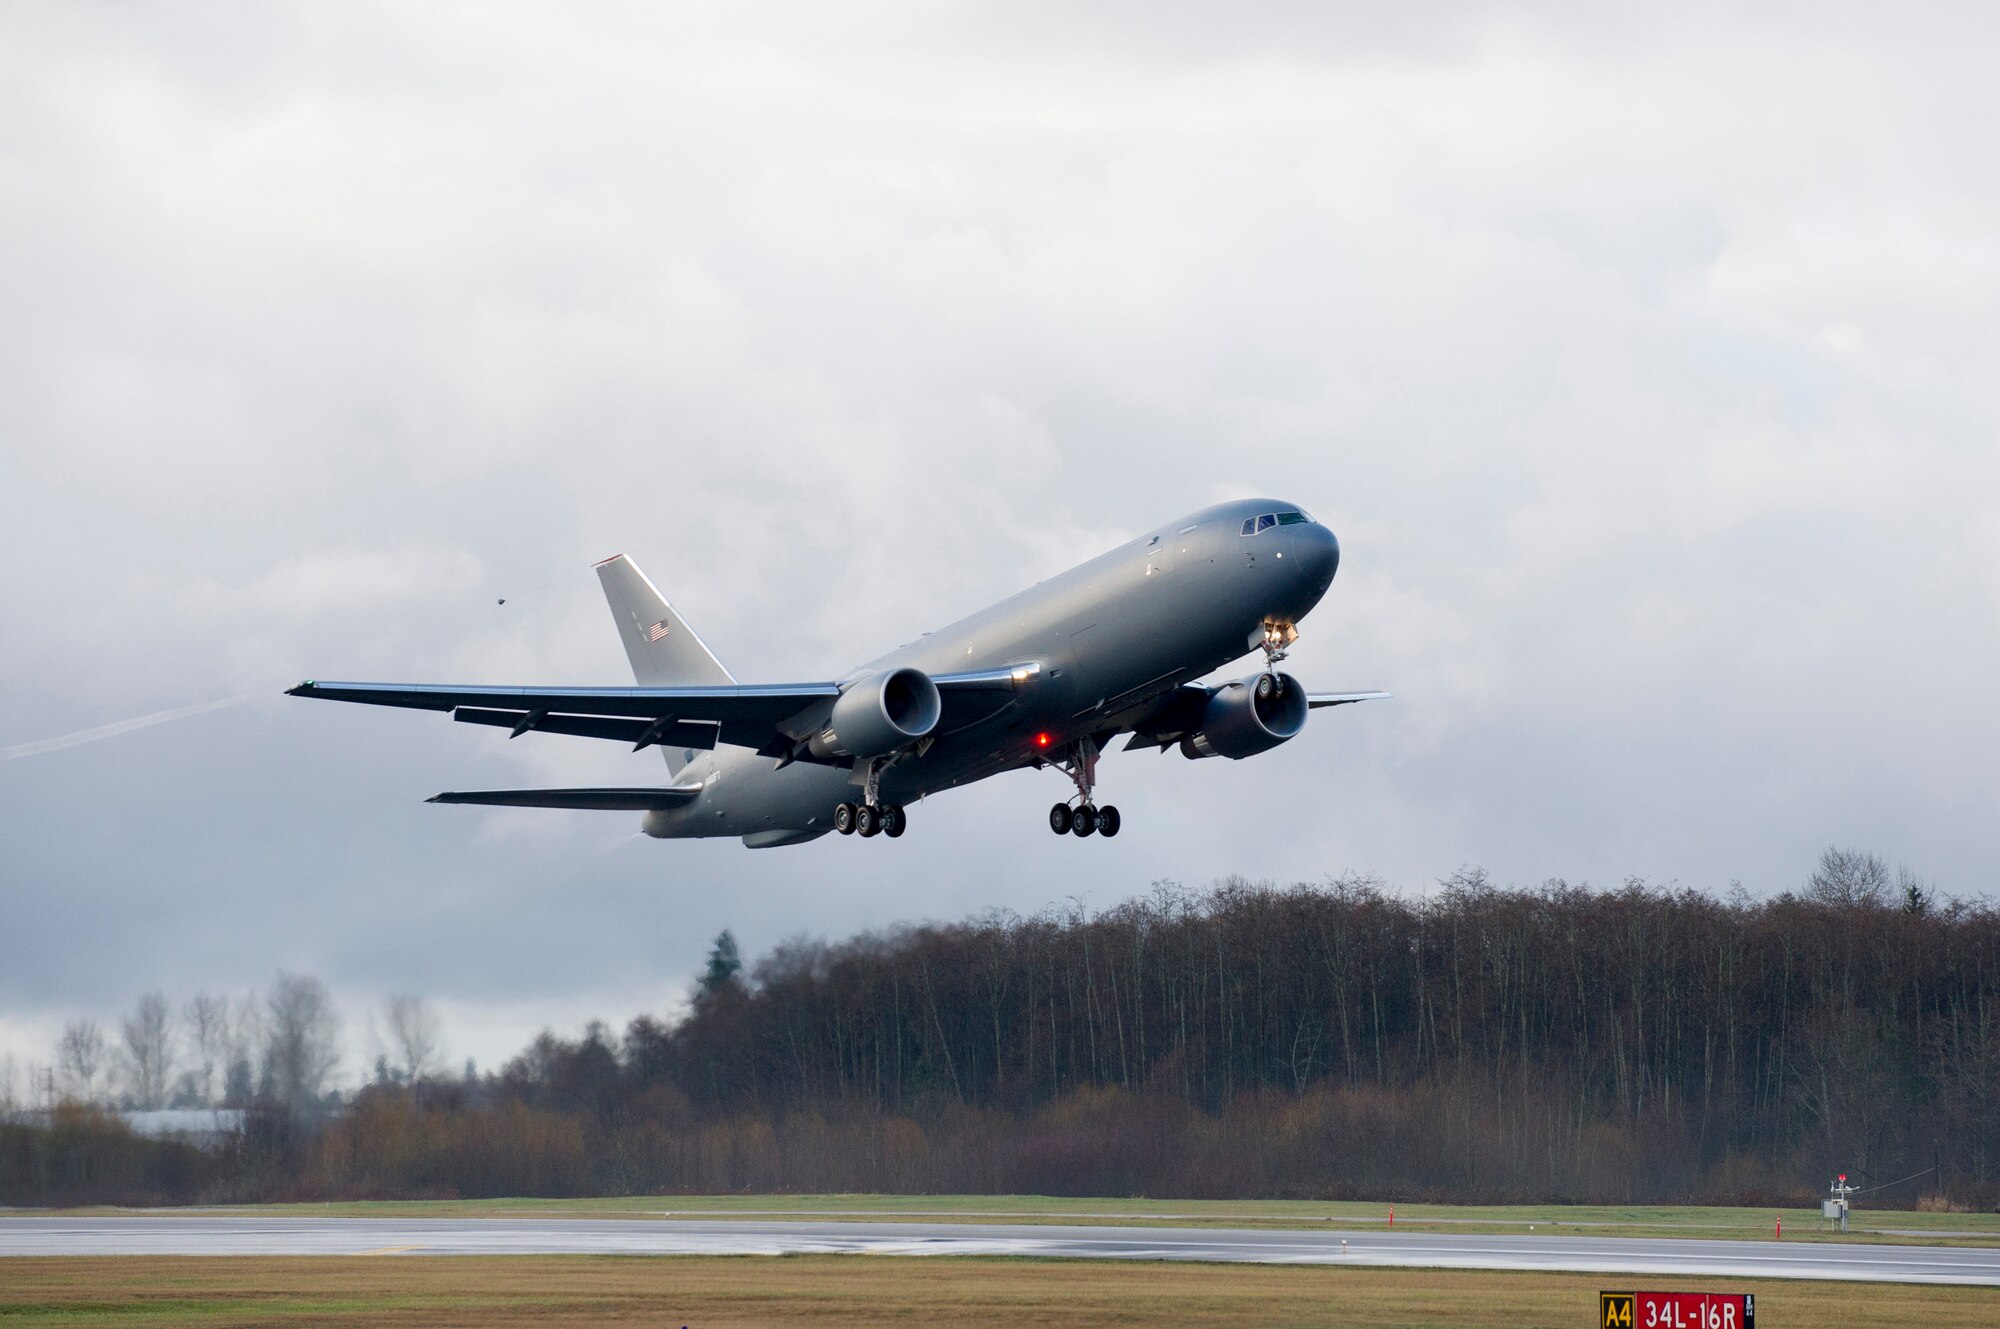 The KC-46 Pegasus development program completed its first flight of Engineering, Manufacturing and Development (EMD) aircraft #1 Dec. 28, 2014. The maiden flight took off at 9:29 AM PST from Paine Field in Everett, Washington, and landed at 1:01 PM PST at Boeing Field in Seattle.EMD #1 is a provisioned 767-2C freighter and the critical building block for the KC-46 missionized aerial refueler.  